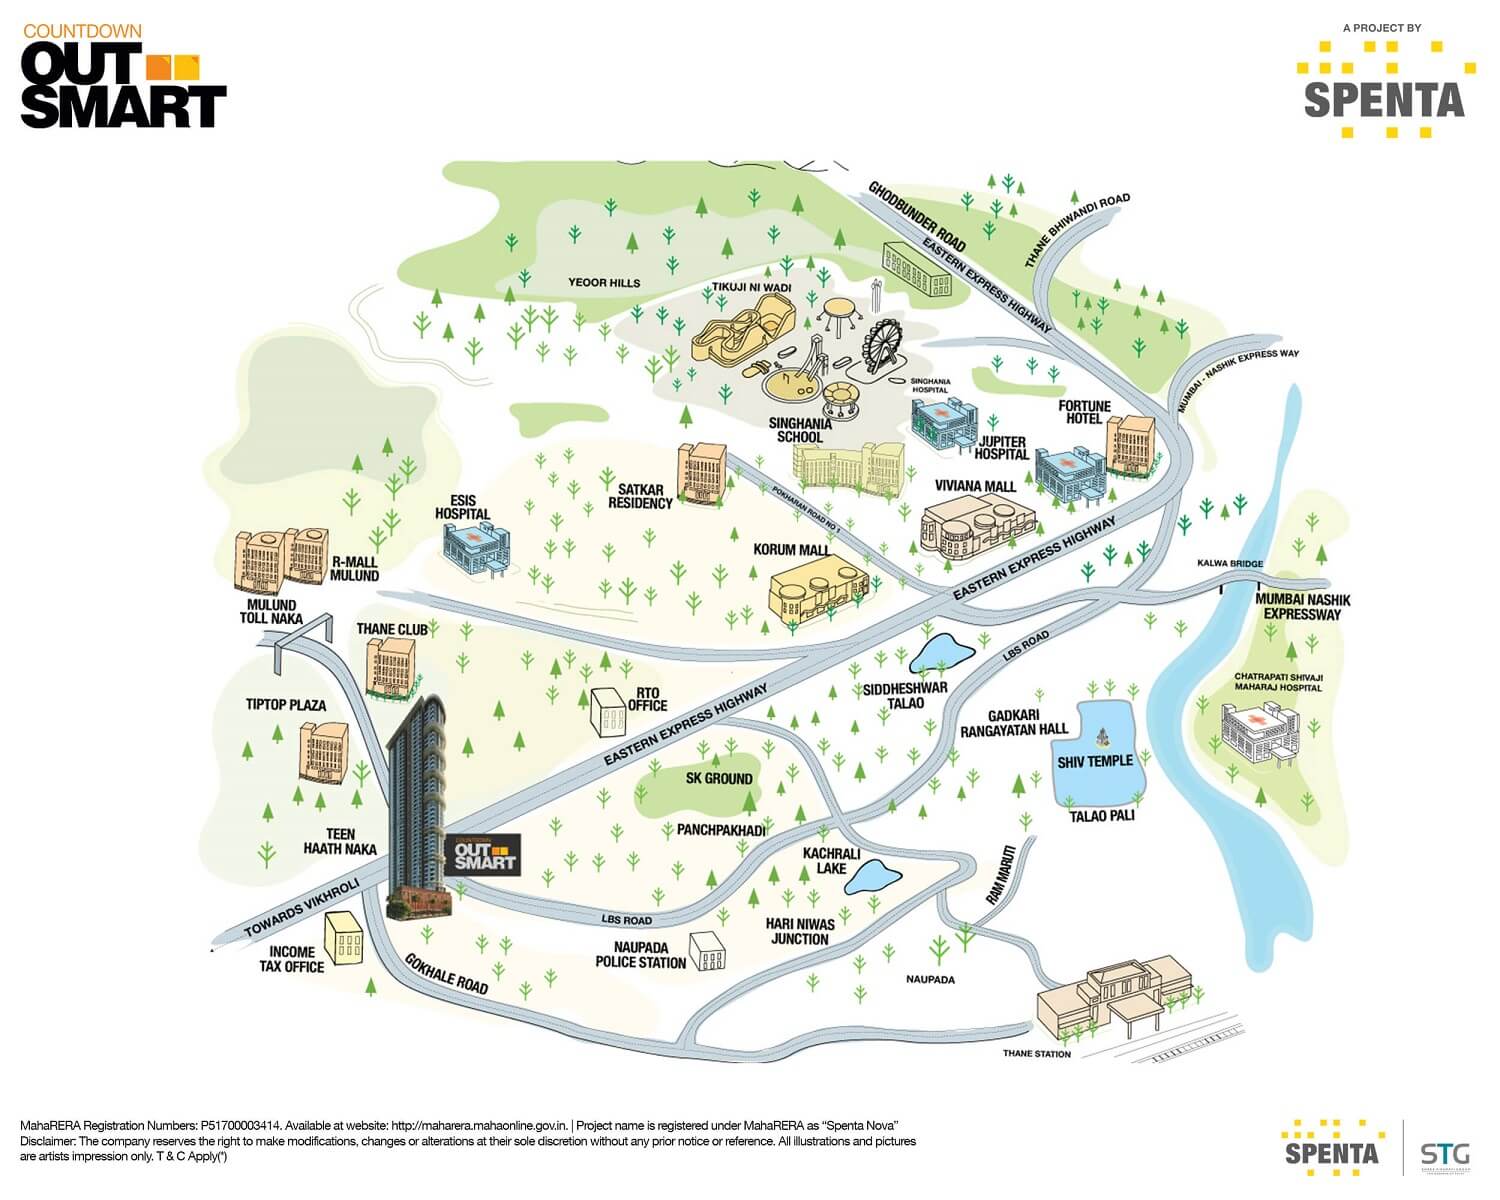 Spenta Outsmart Location Map